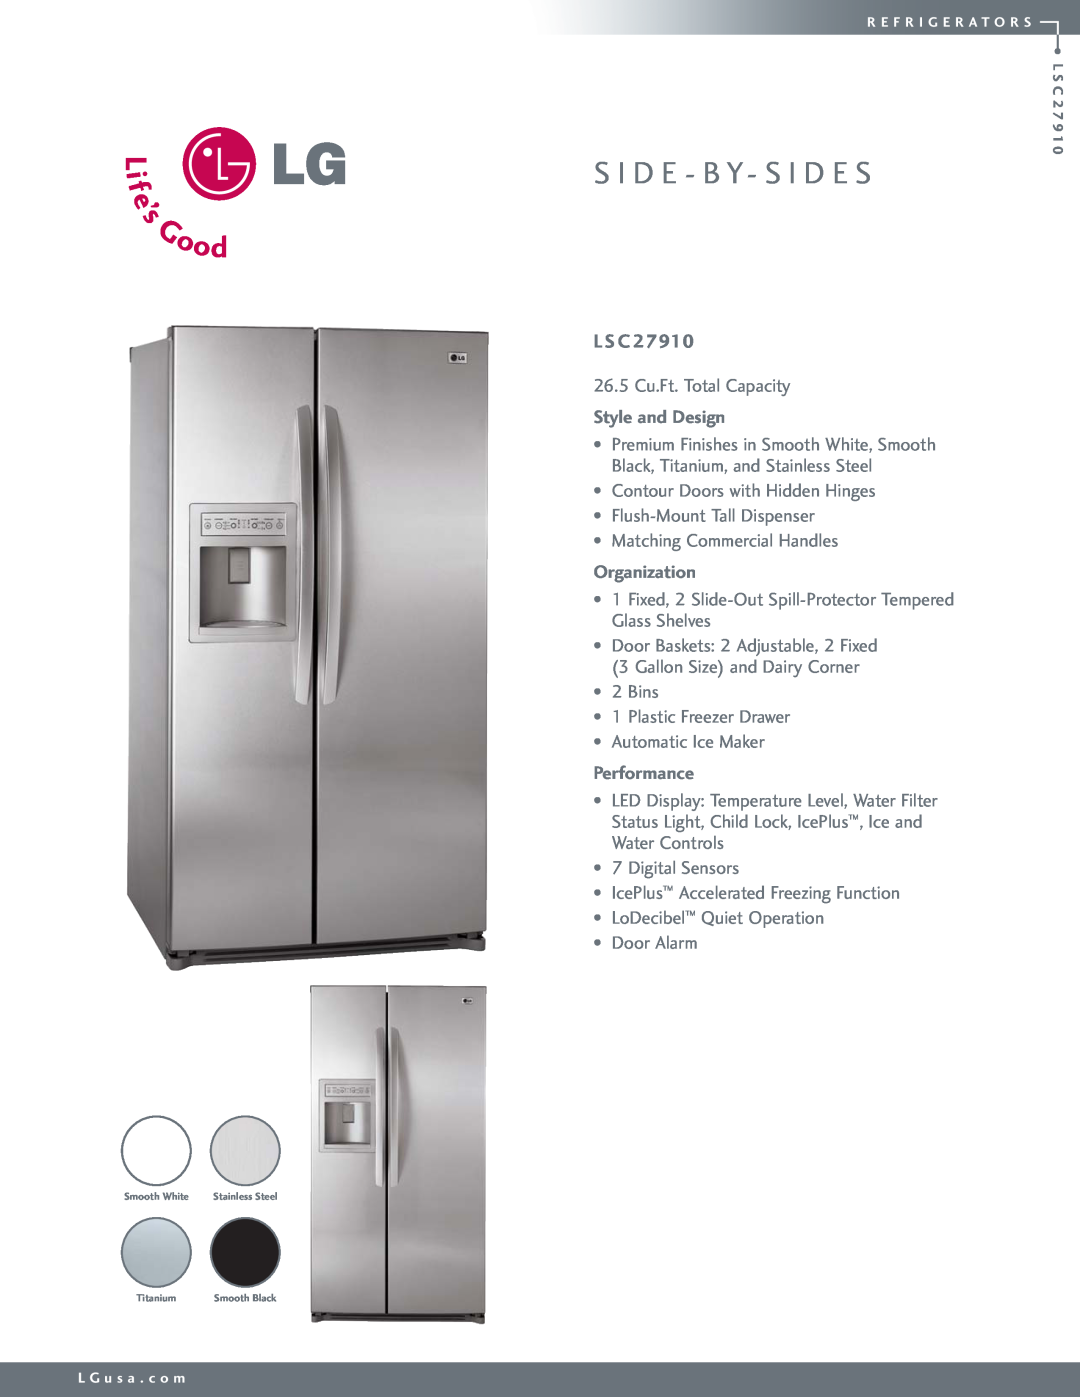 LG Electronics LSC27910TT manual L S C, S I D E - B Y- S I D E S, Style and Design, Organization, Performance 